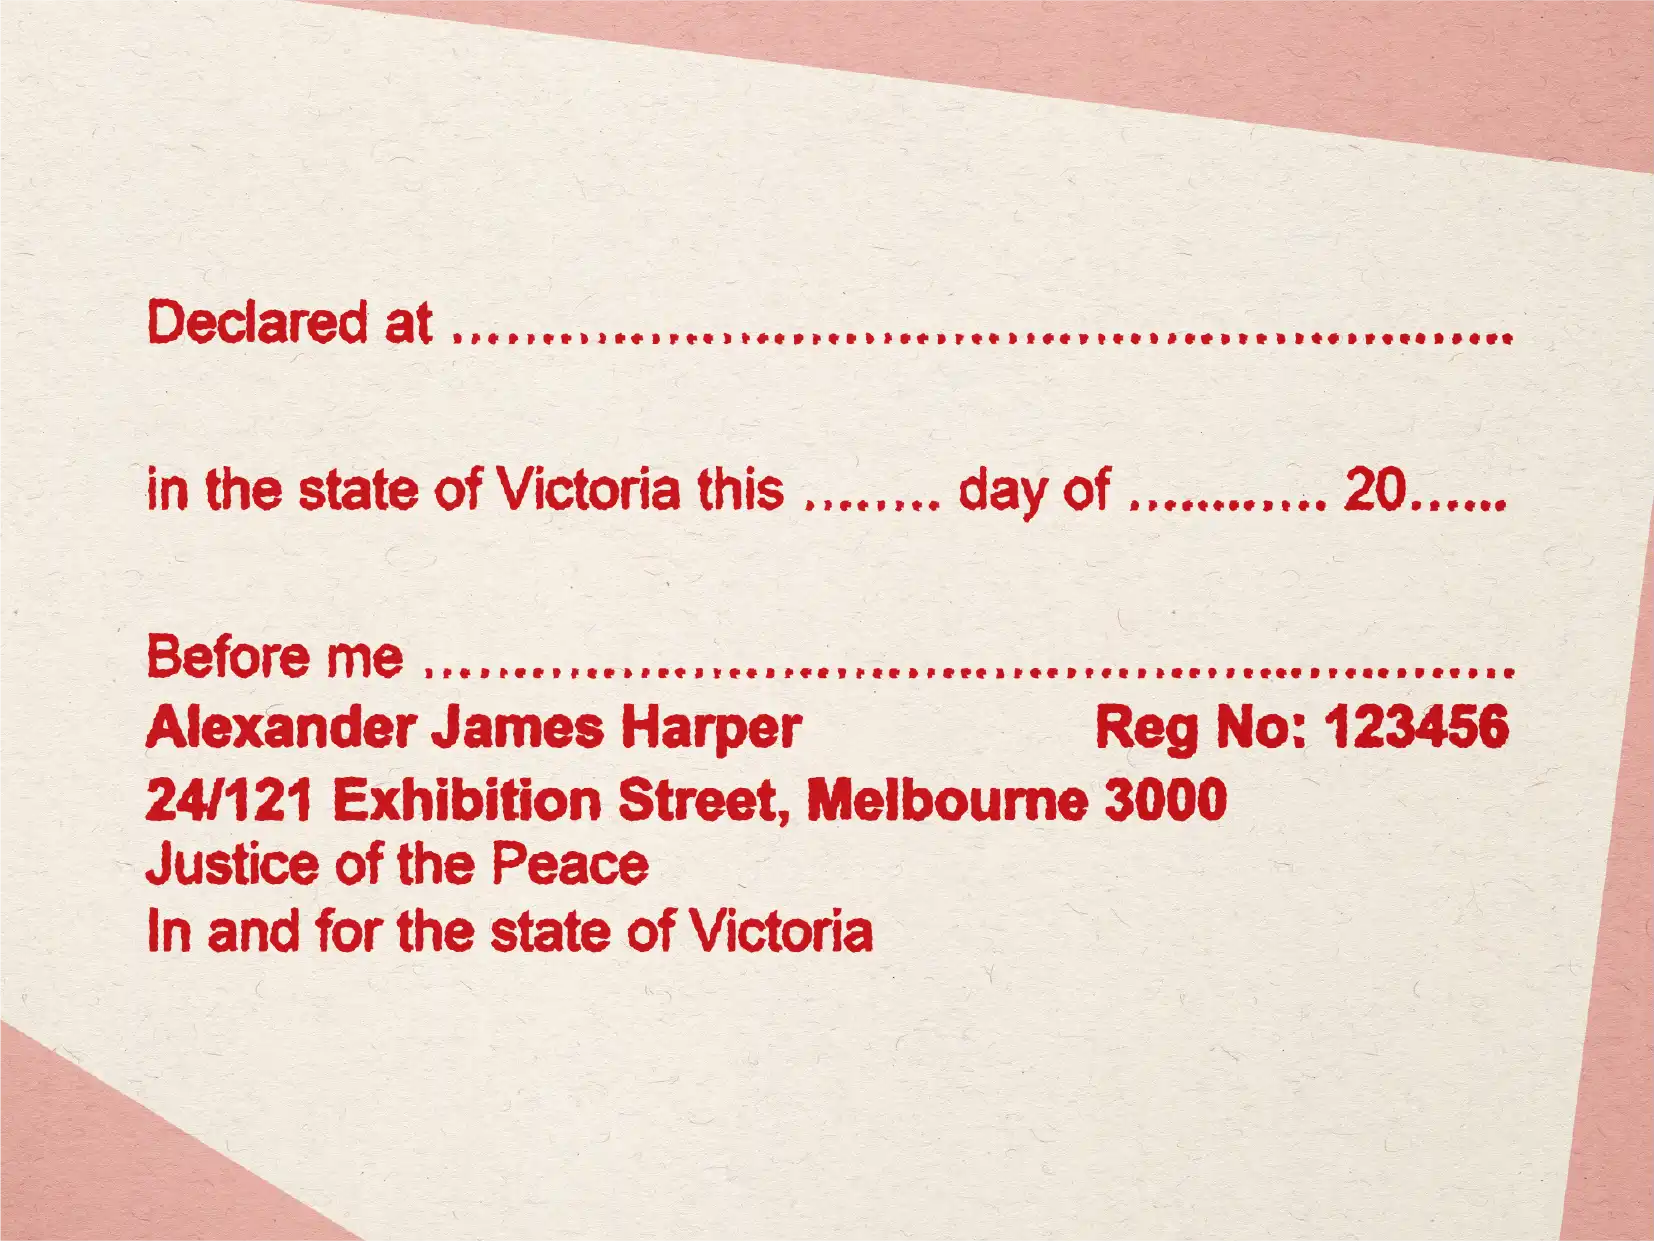 red rubber stamp for signing Statutory Declarations in Victoria 